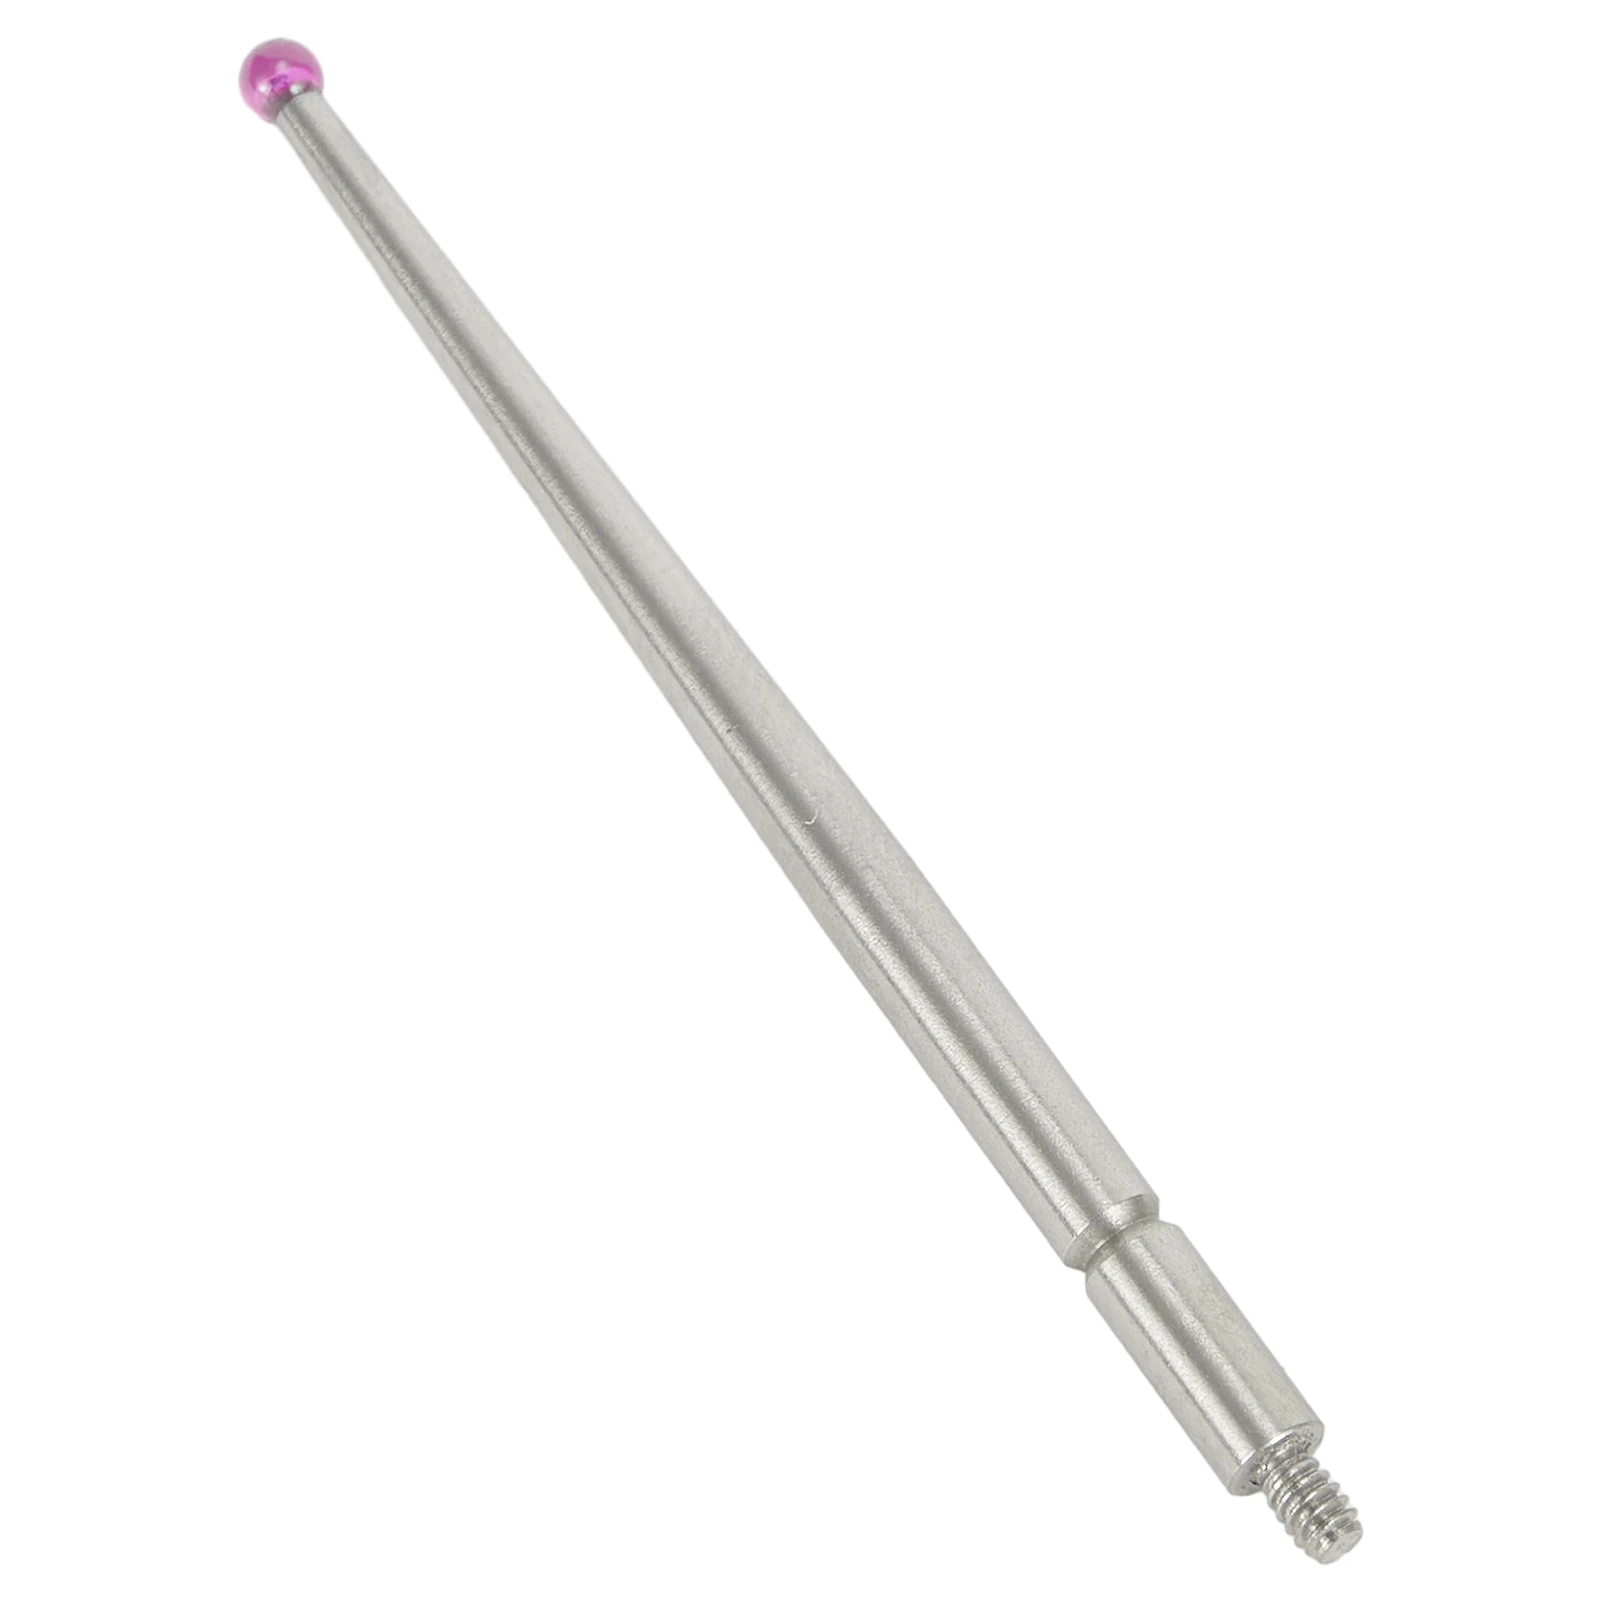 Contact Points Probe For Dial Test Indicator M1.6 Threaded Shank 2mm Diameter Ru By Ball For 513-115 For 513-215F contact points for dial test indicator 2mm diameter tungsten carbide ball 36 8mm long 513 114 513 514e 513 214fe 513 214